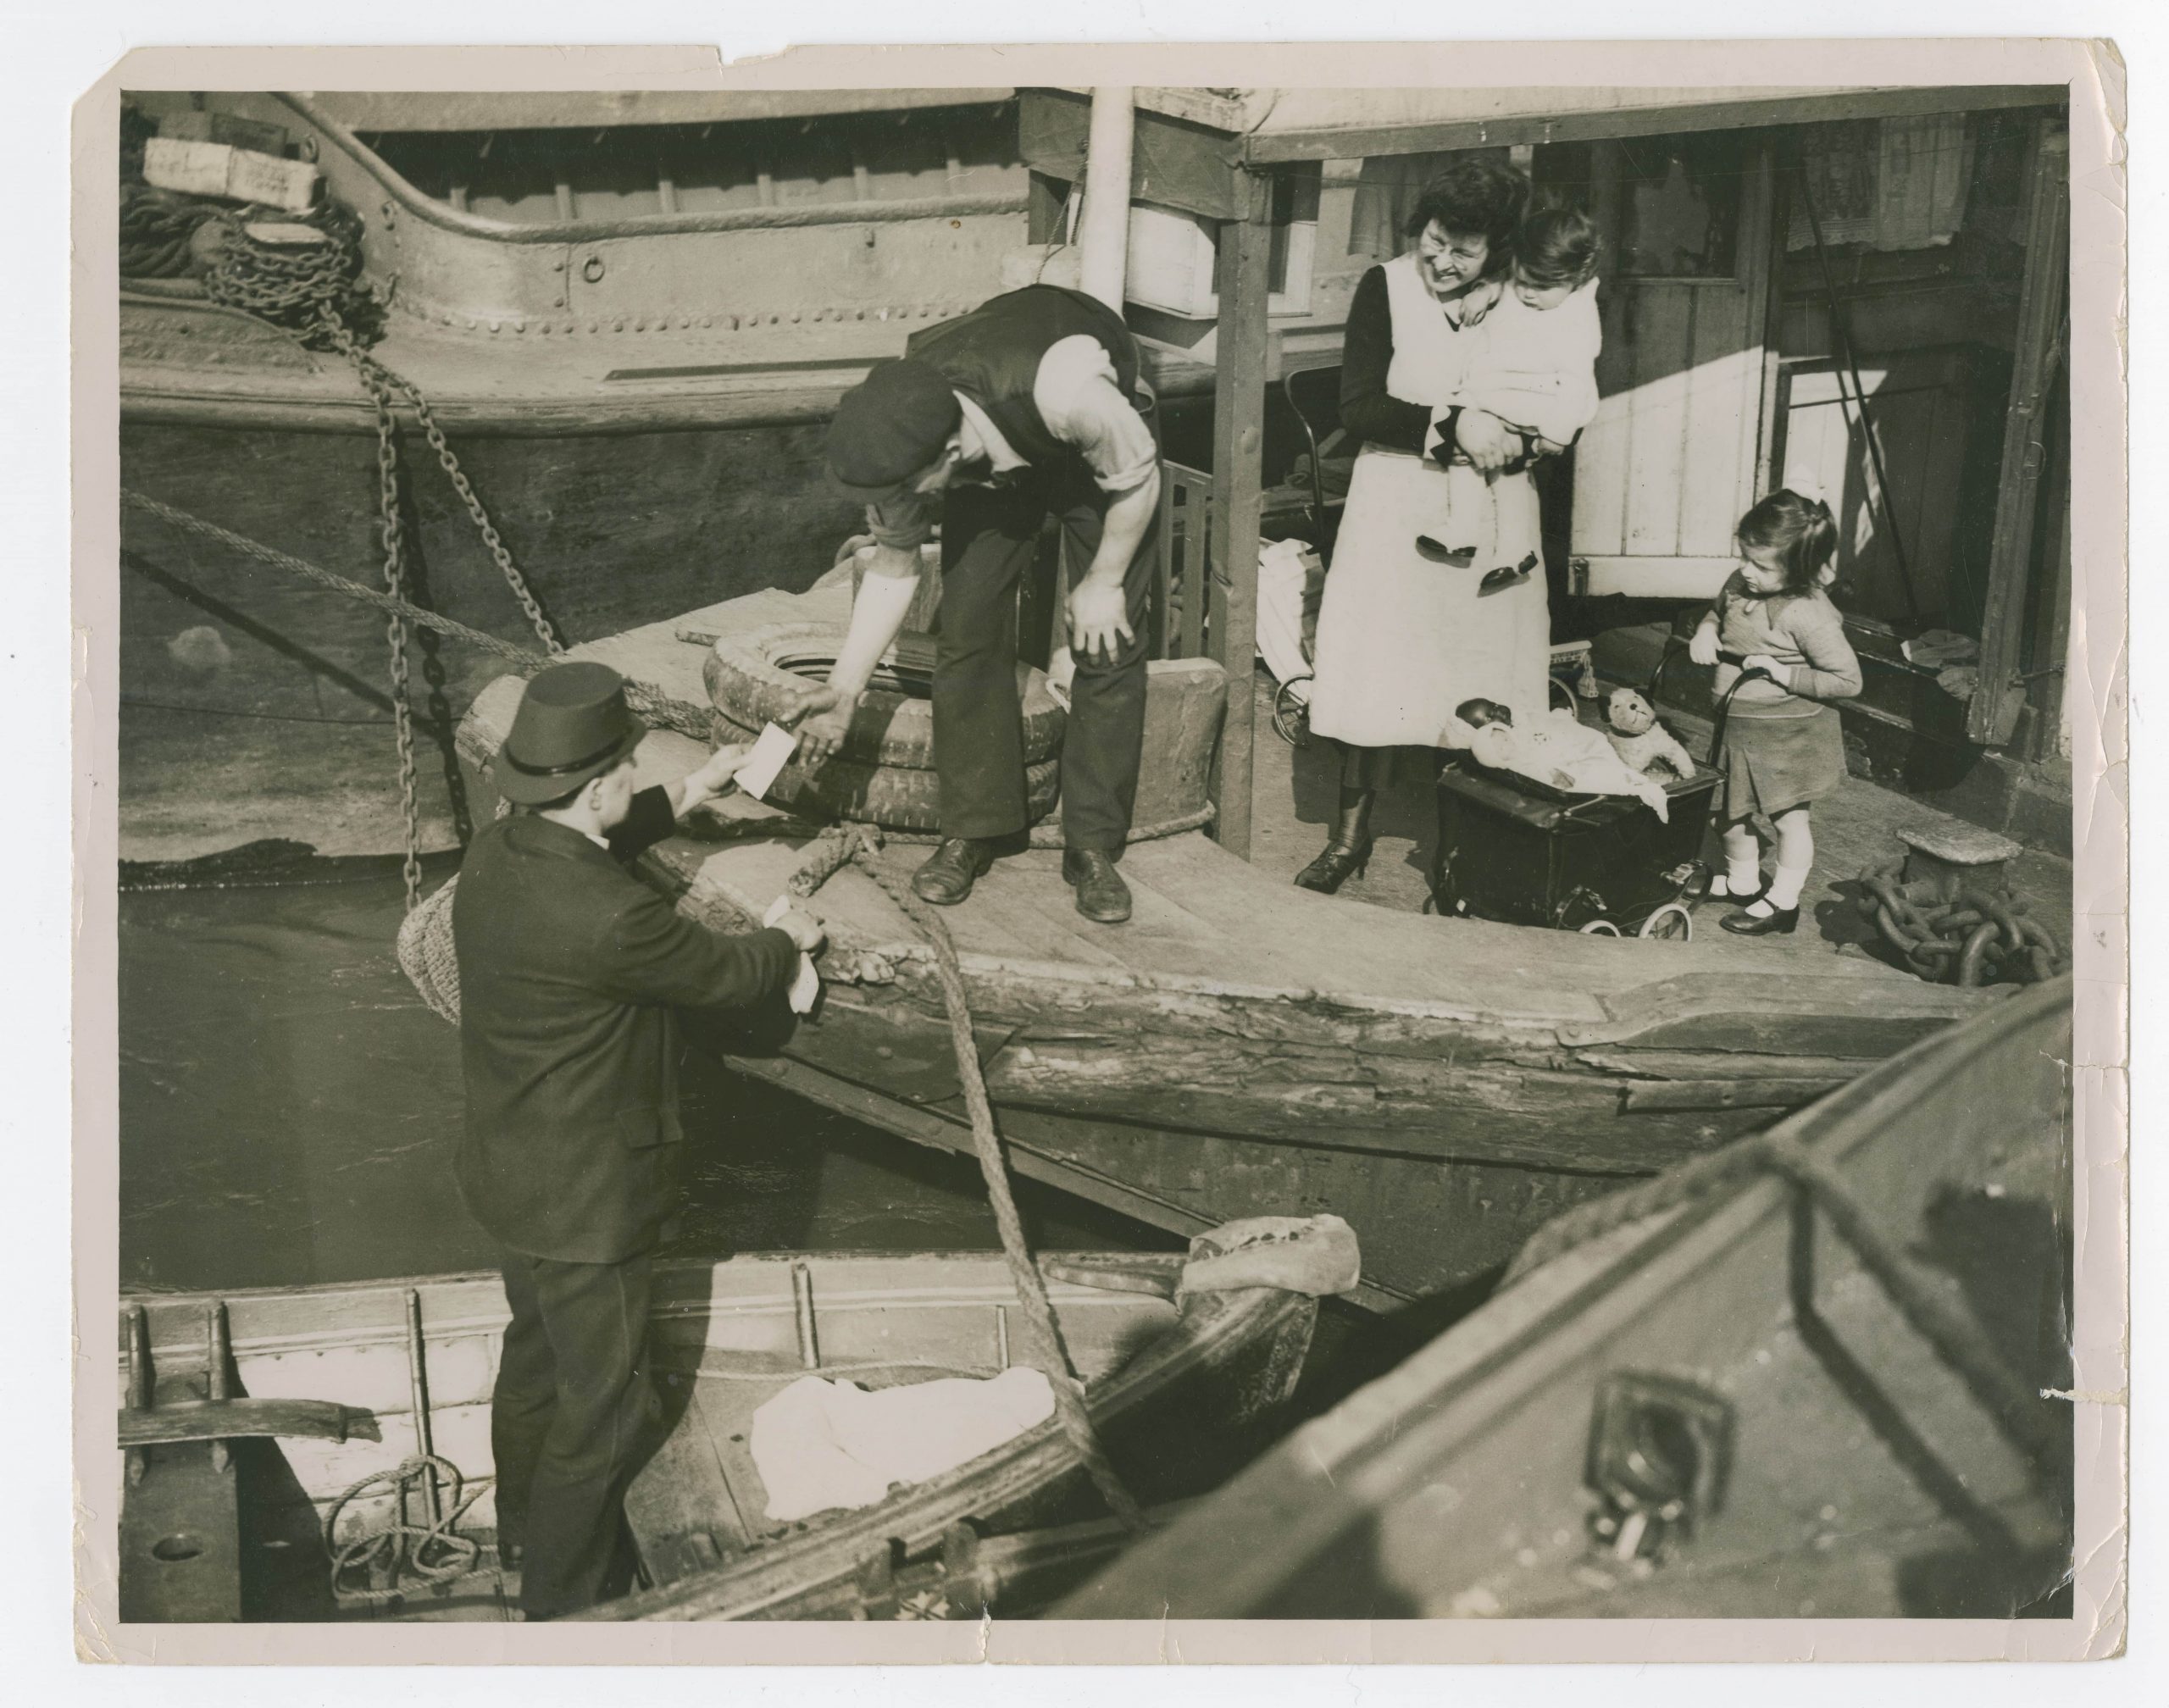 Herbert stands in the skiff, which is oared to a dock by a thick rope, handing a letter to a man, stood next to his young family. The woman stood next to the man, bending over to grab the letter, wears a white smock and is carrying a little girl, also in a dress. An older little girl stands on the far right of her family holding her toy pram.